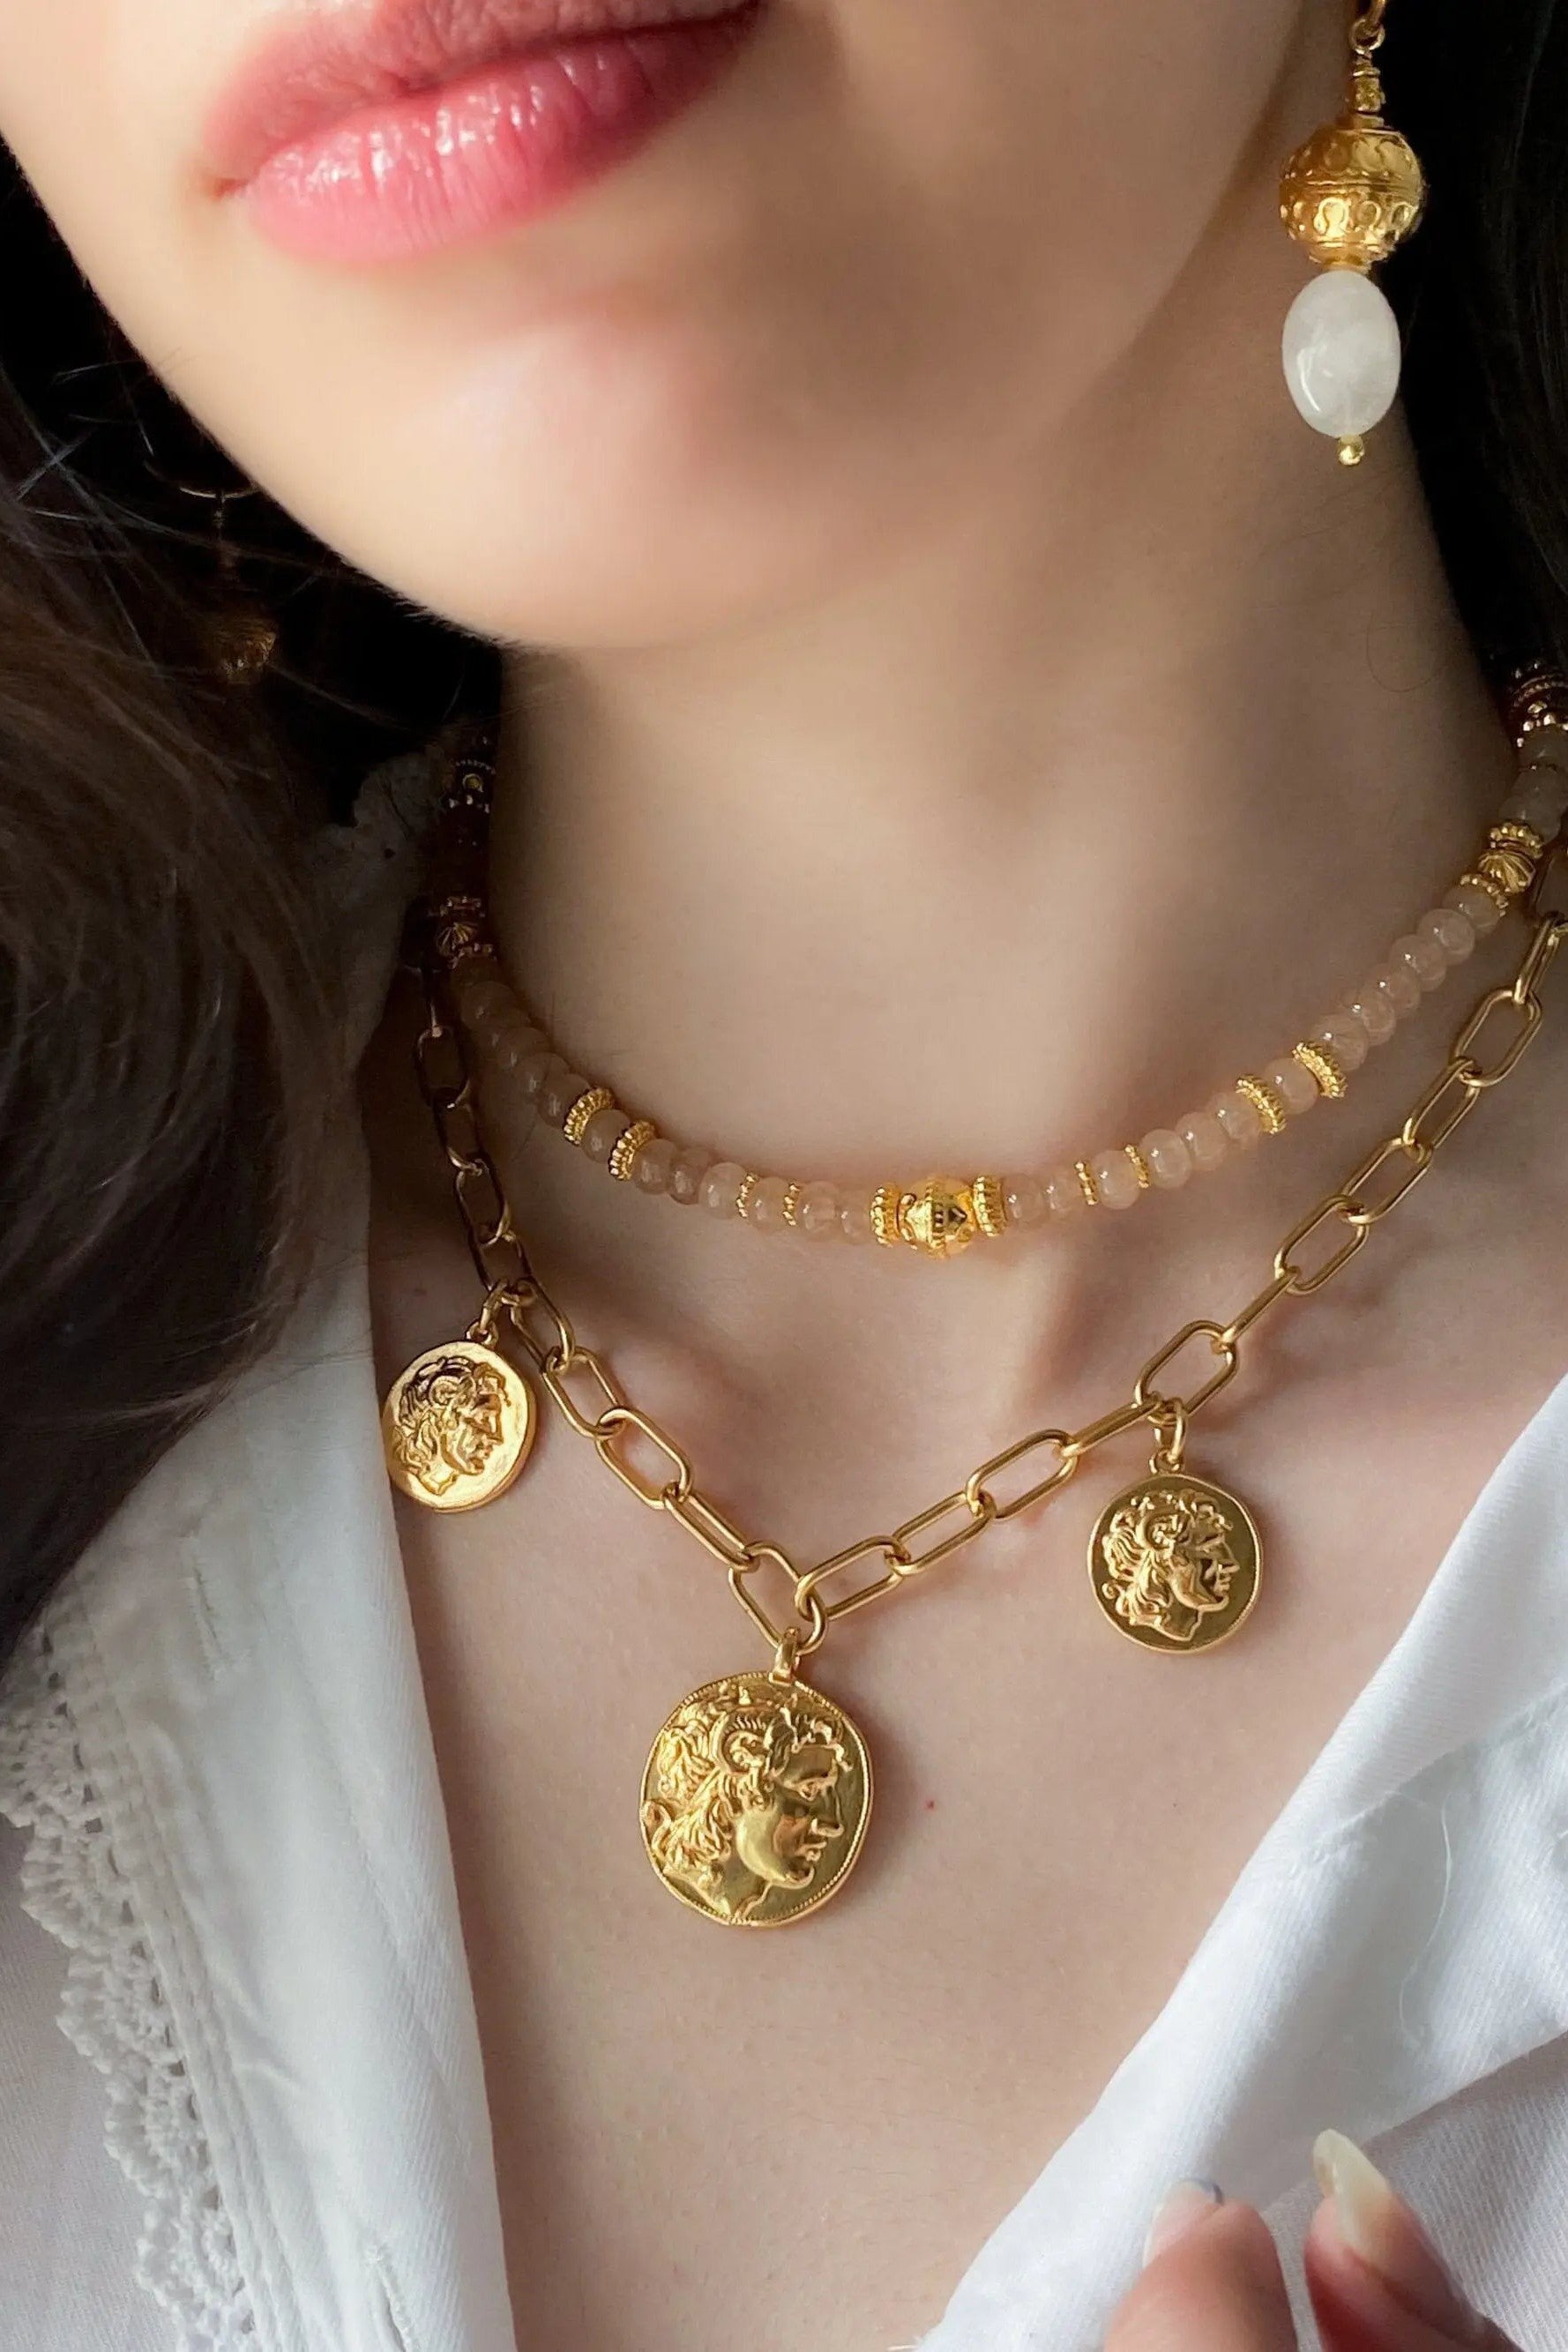 Gold Coin Necklace Statement Thick Necklace Paperclip Chain Chunky Gold Necklace Coin Pendant Medaillon Vintage Style Gift for her